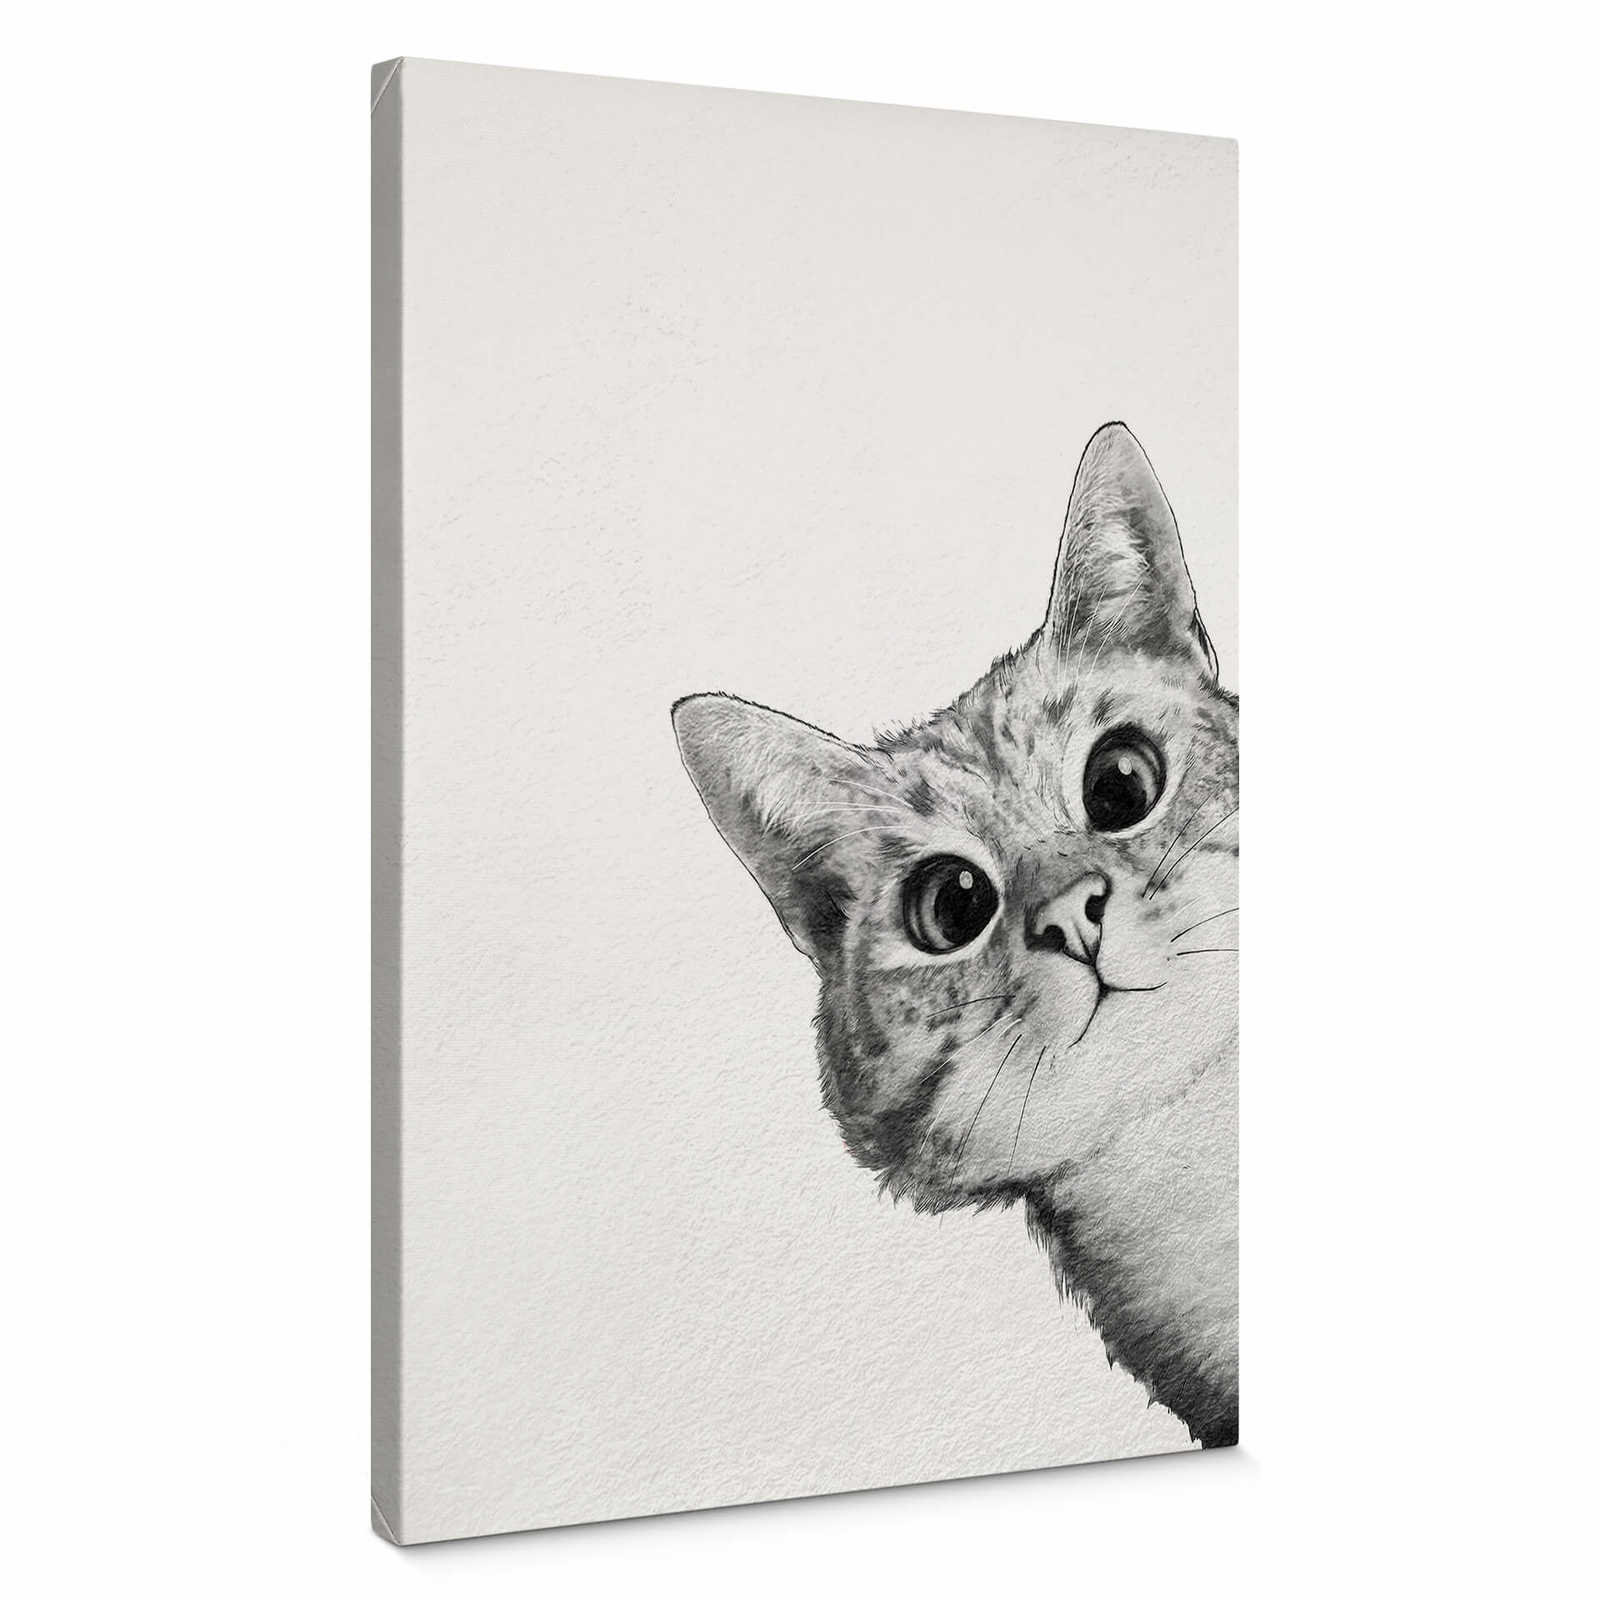         Canvas print "Sneaky Cat" by Graves, cat in black and white
    